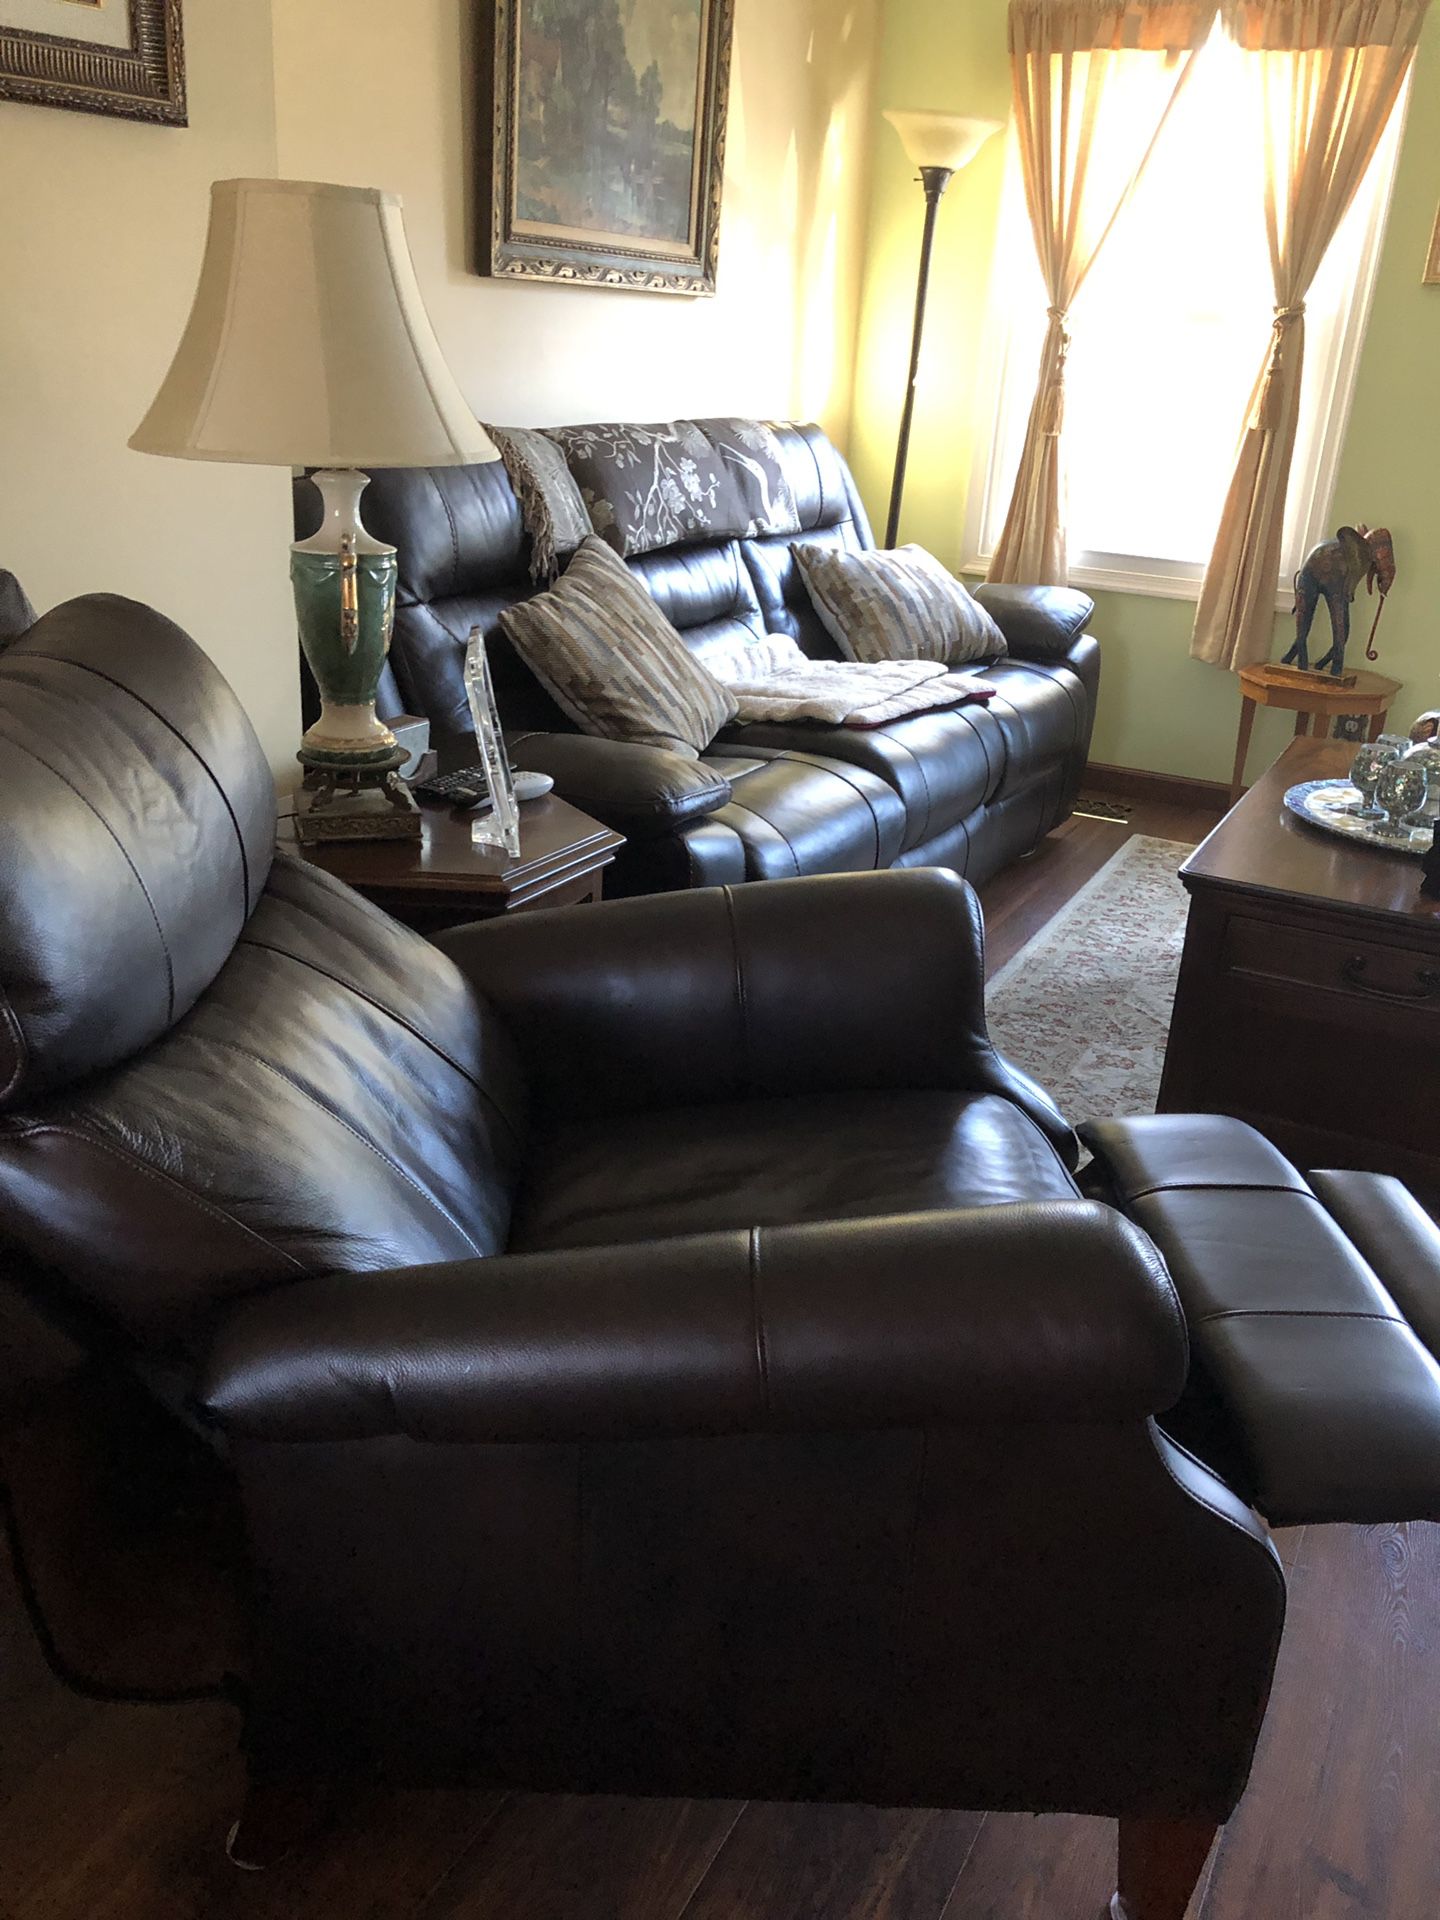 Single manual leather recliner chair